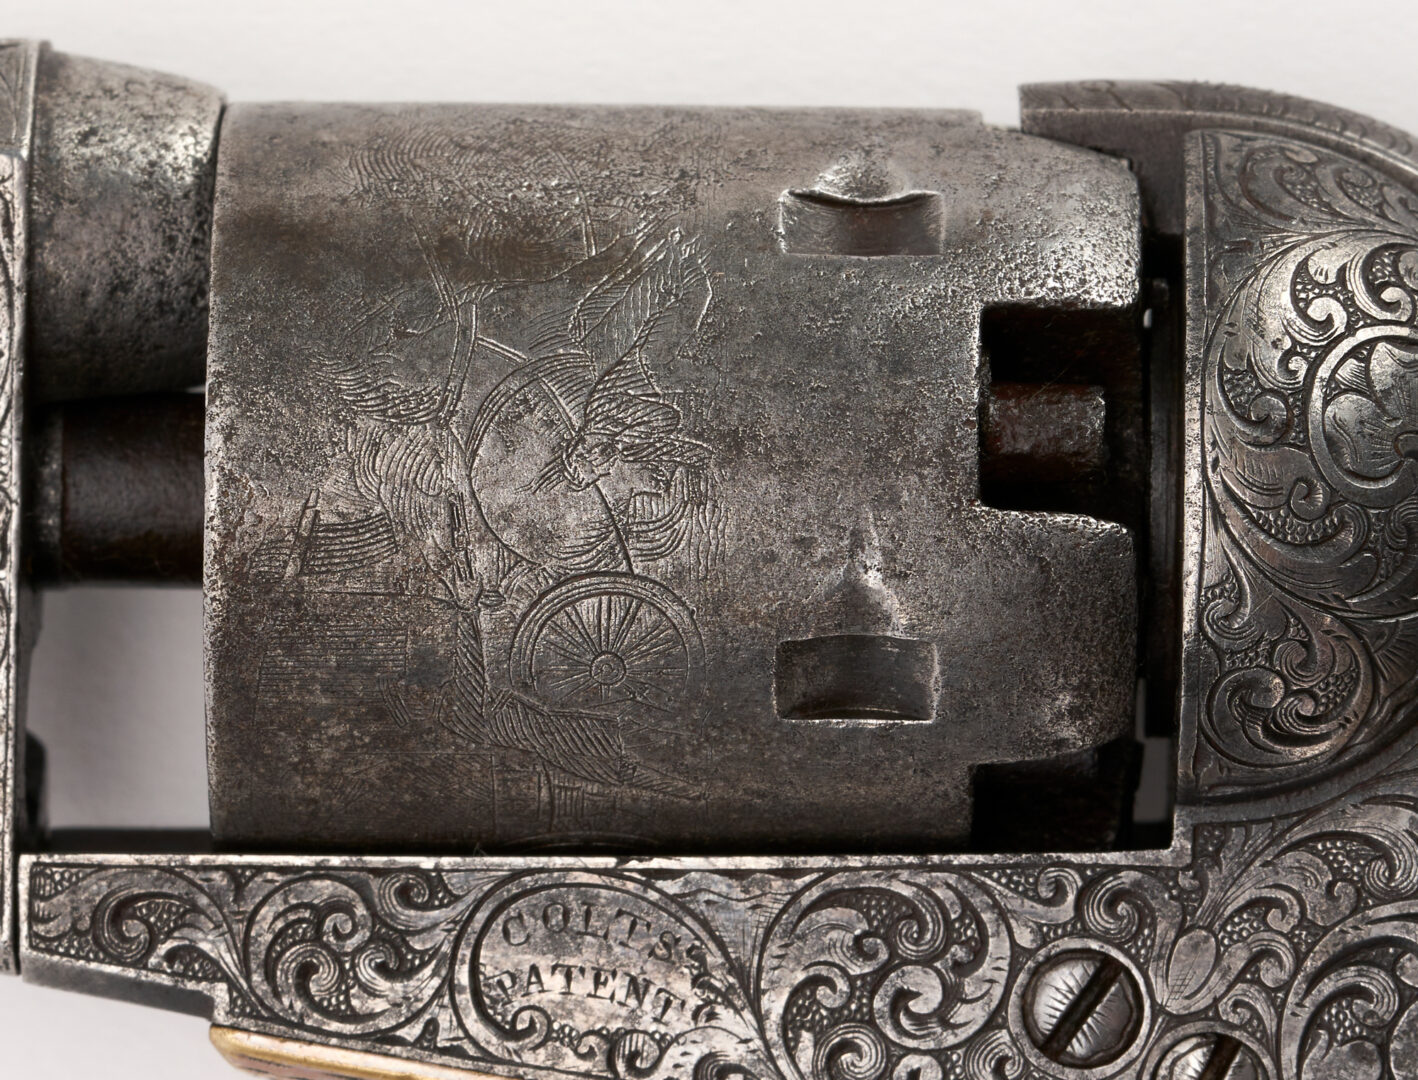 Lot 671: Gustave Young Factory Engraved Colt Model 1849 Pocket Revolver w/ Case, .31 cal., 3 items